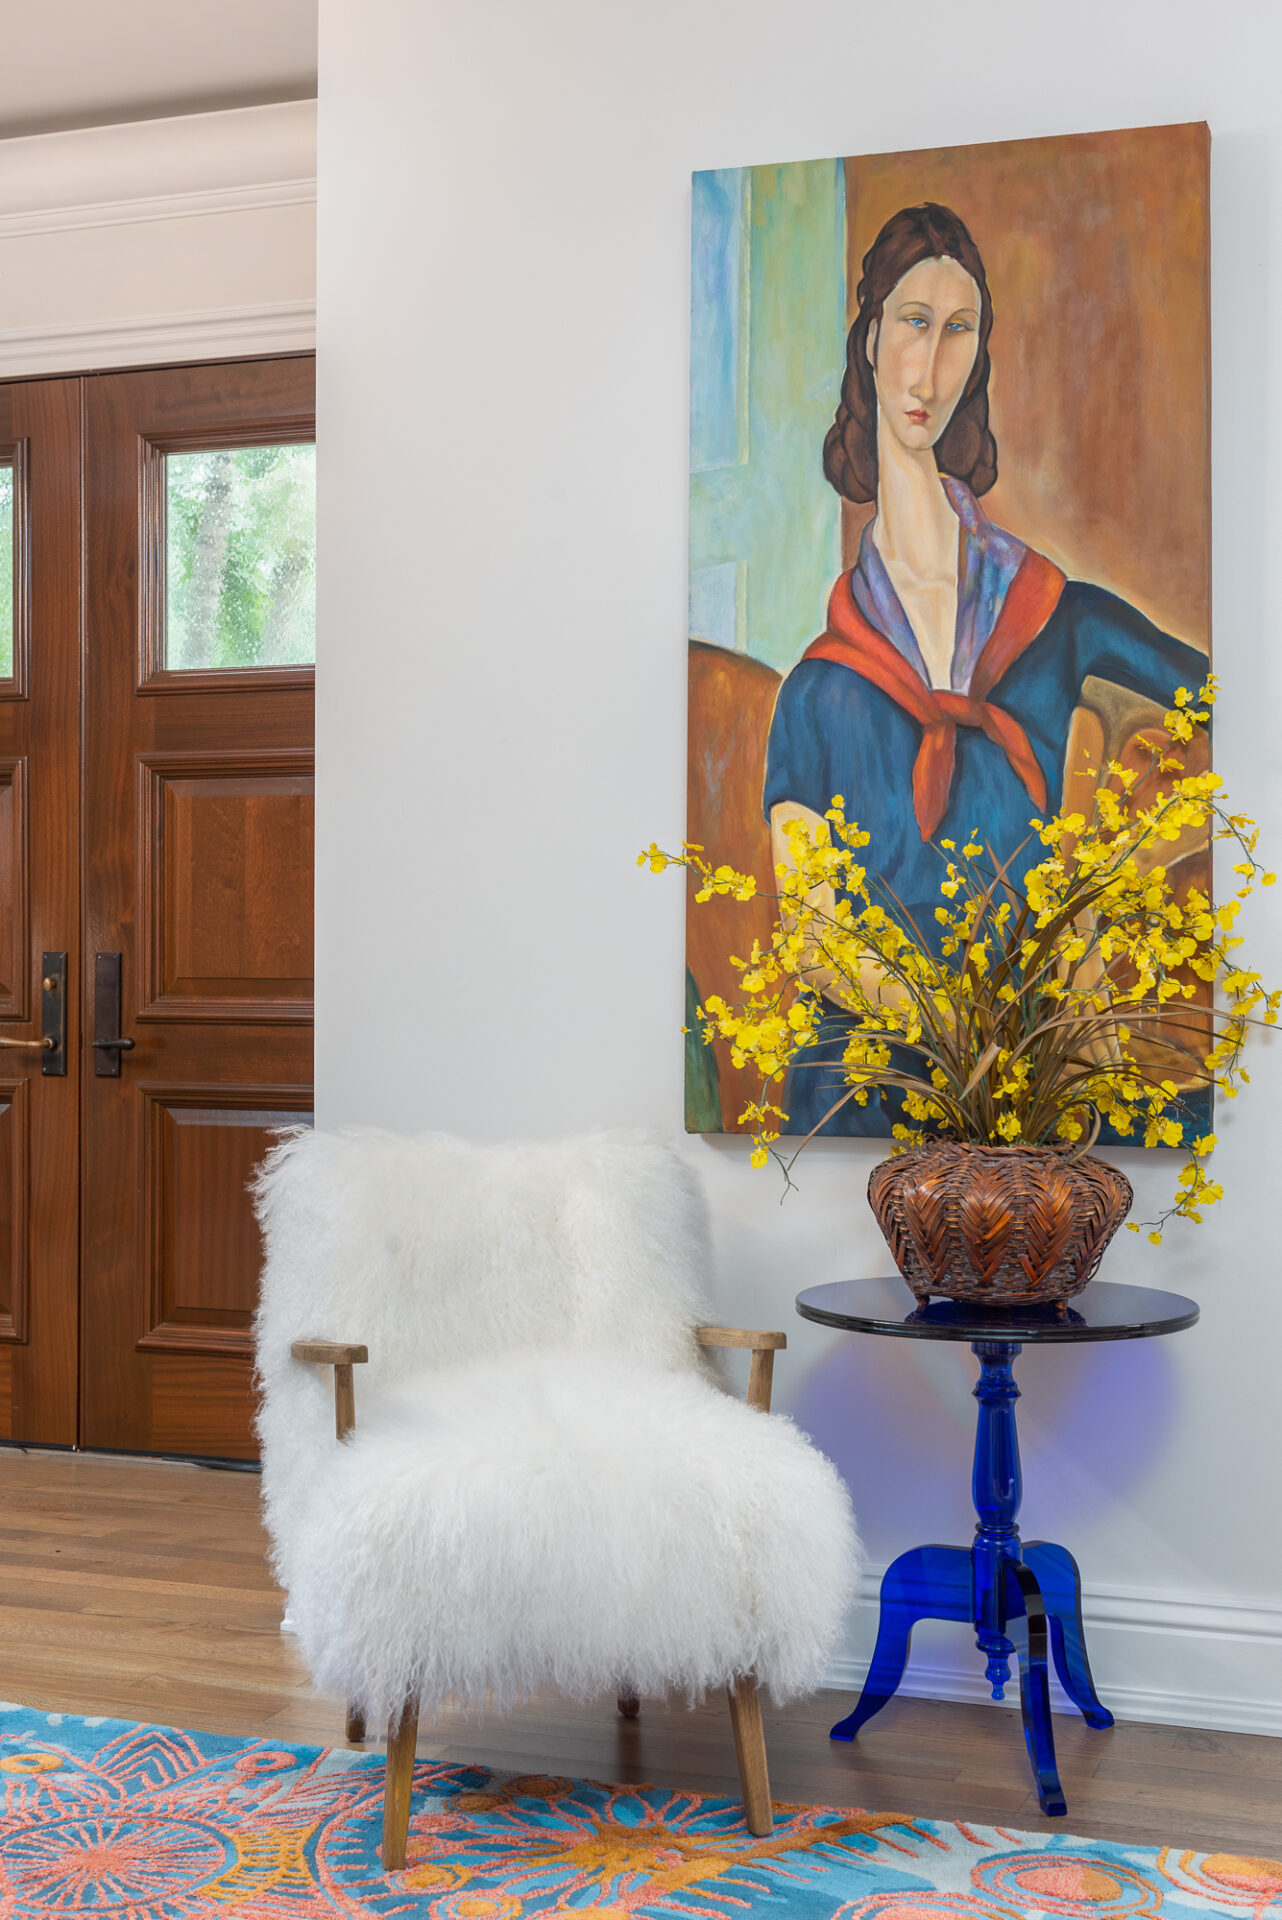 A painting and fluffy seat on the lounge